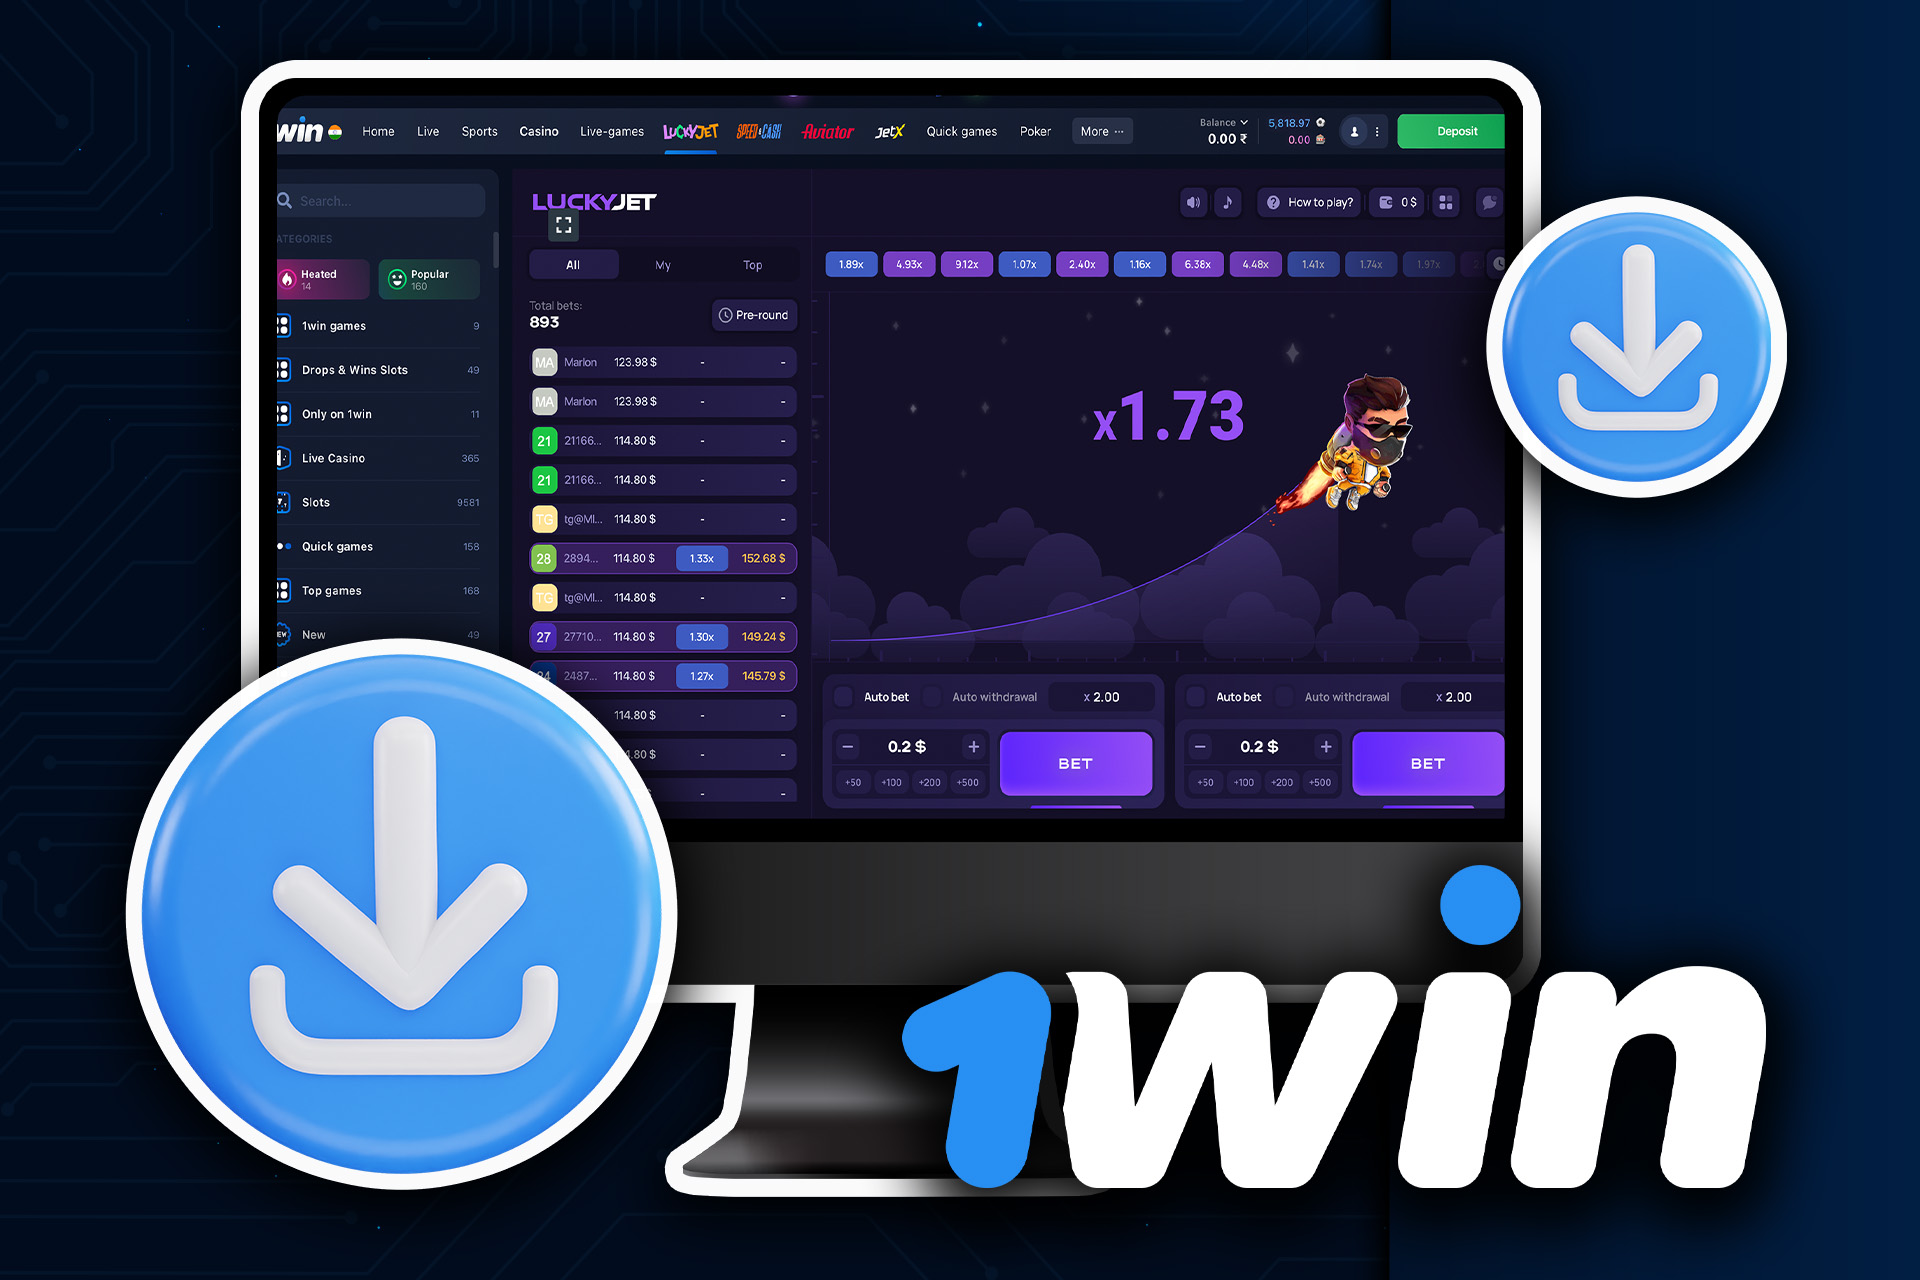 Download the 1win app on your PC or laptop and start playing Lucky Jet.